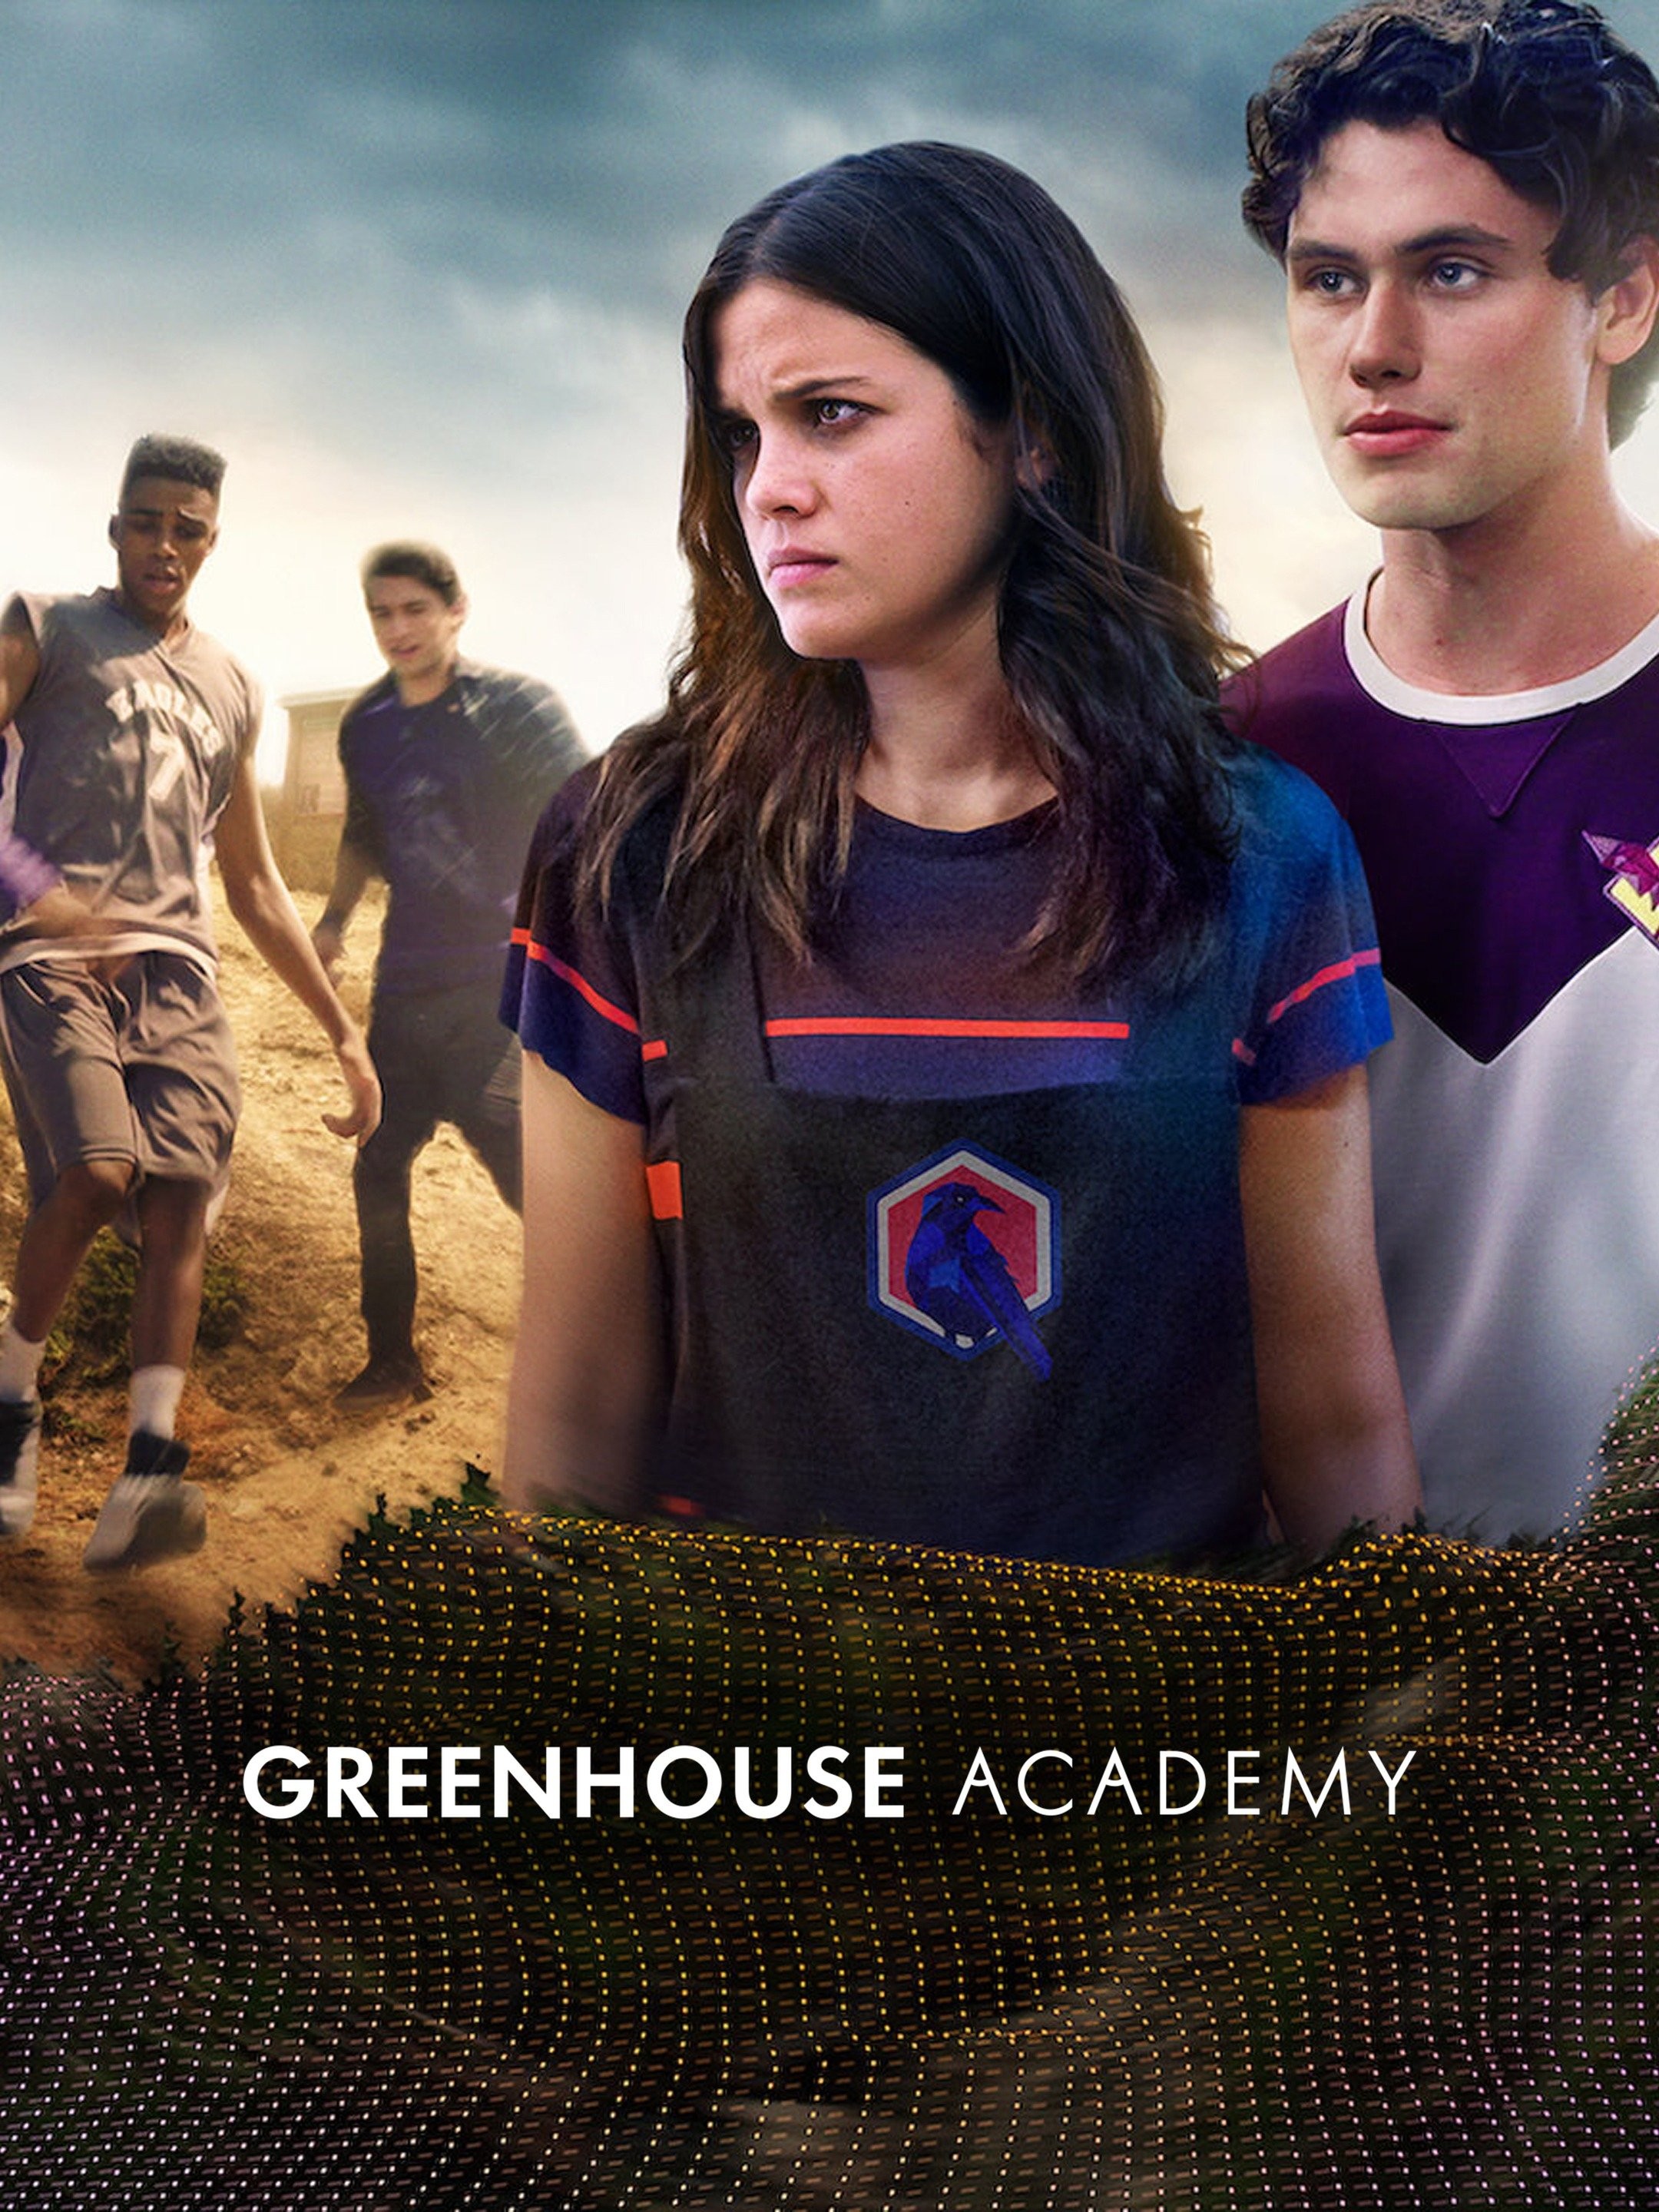 Greenhouse Academy - Rotten Tomatoes